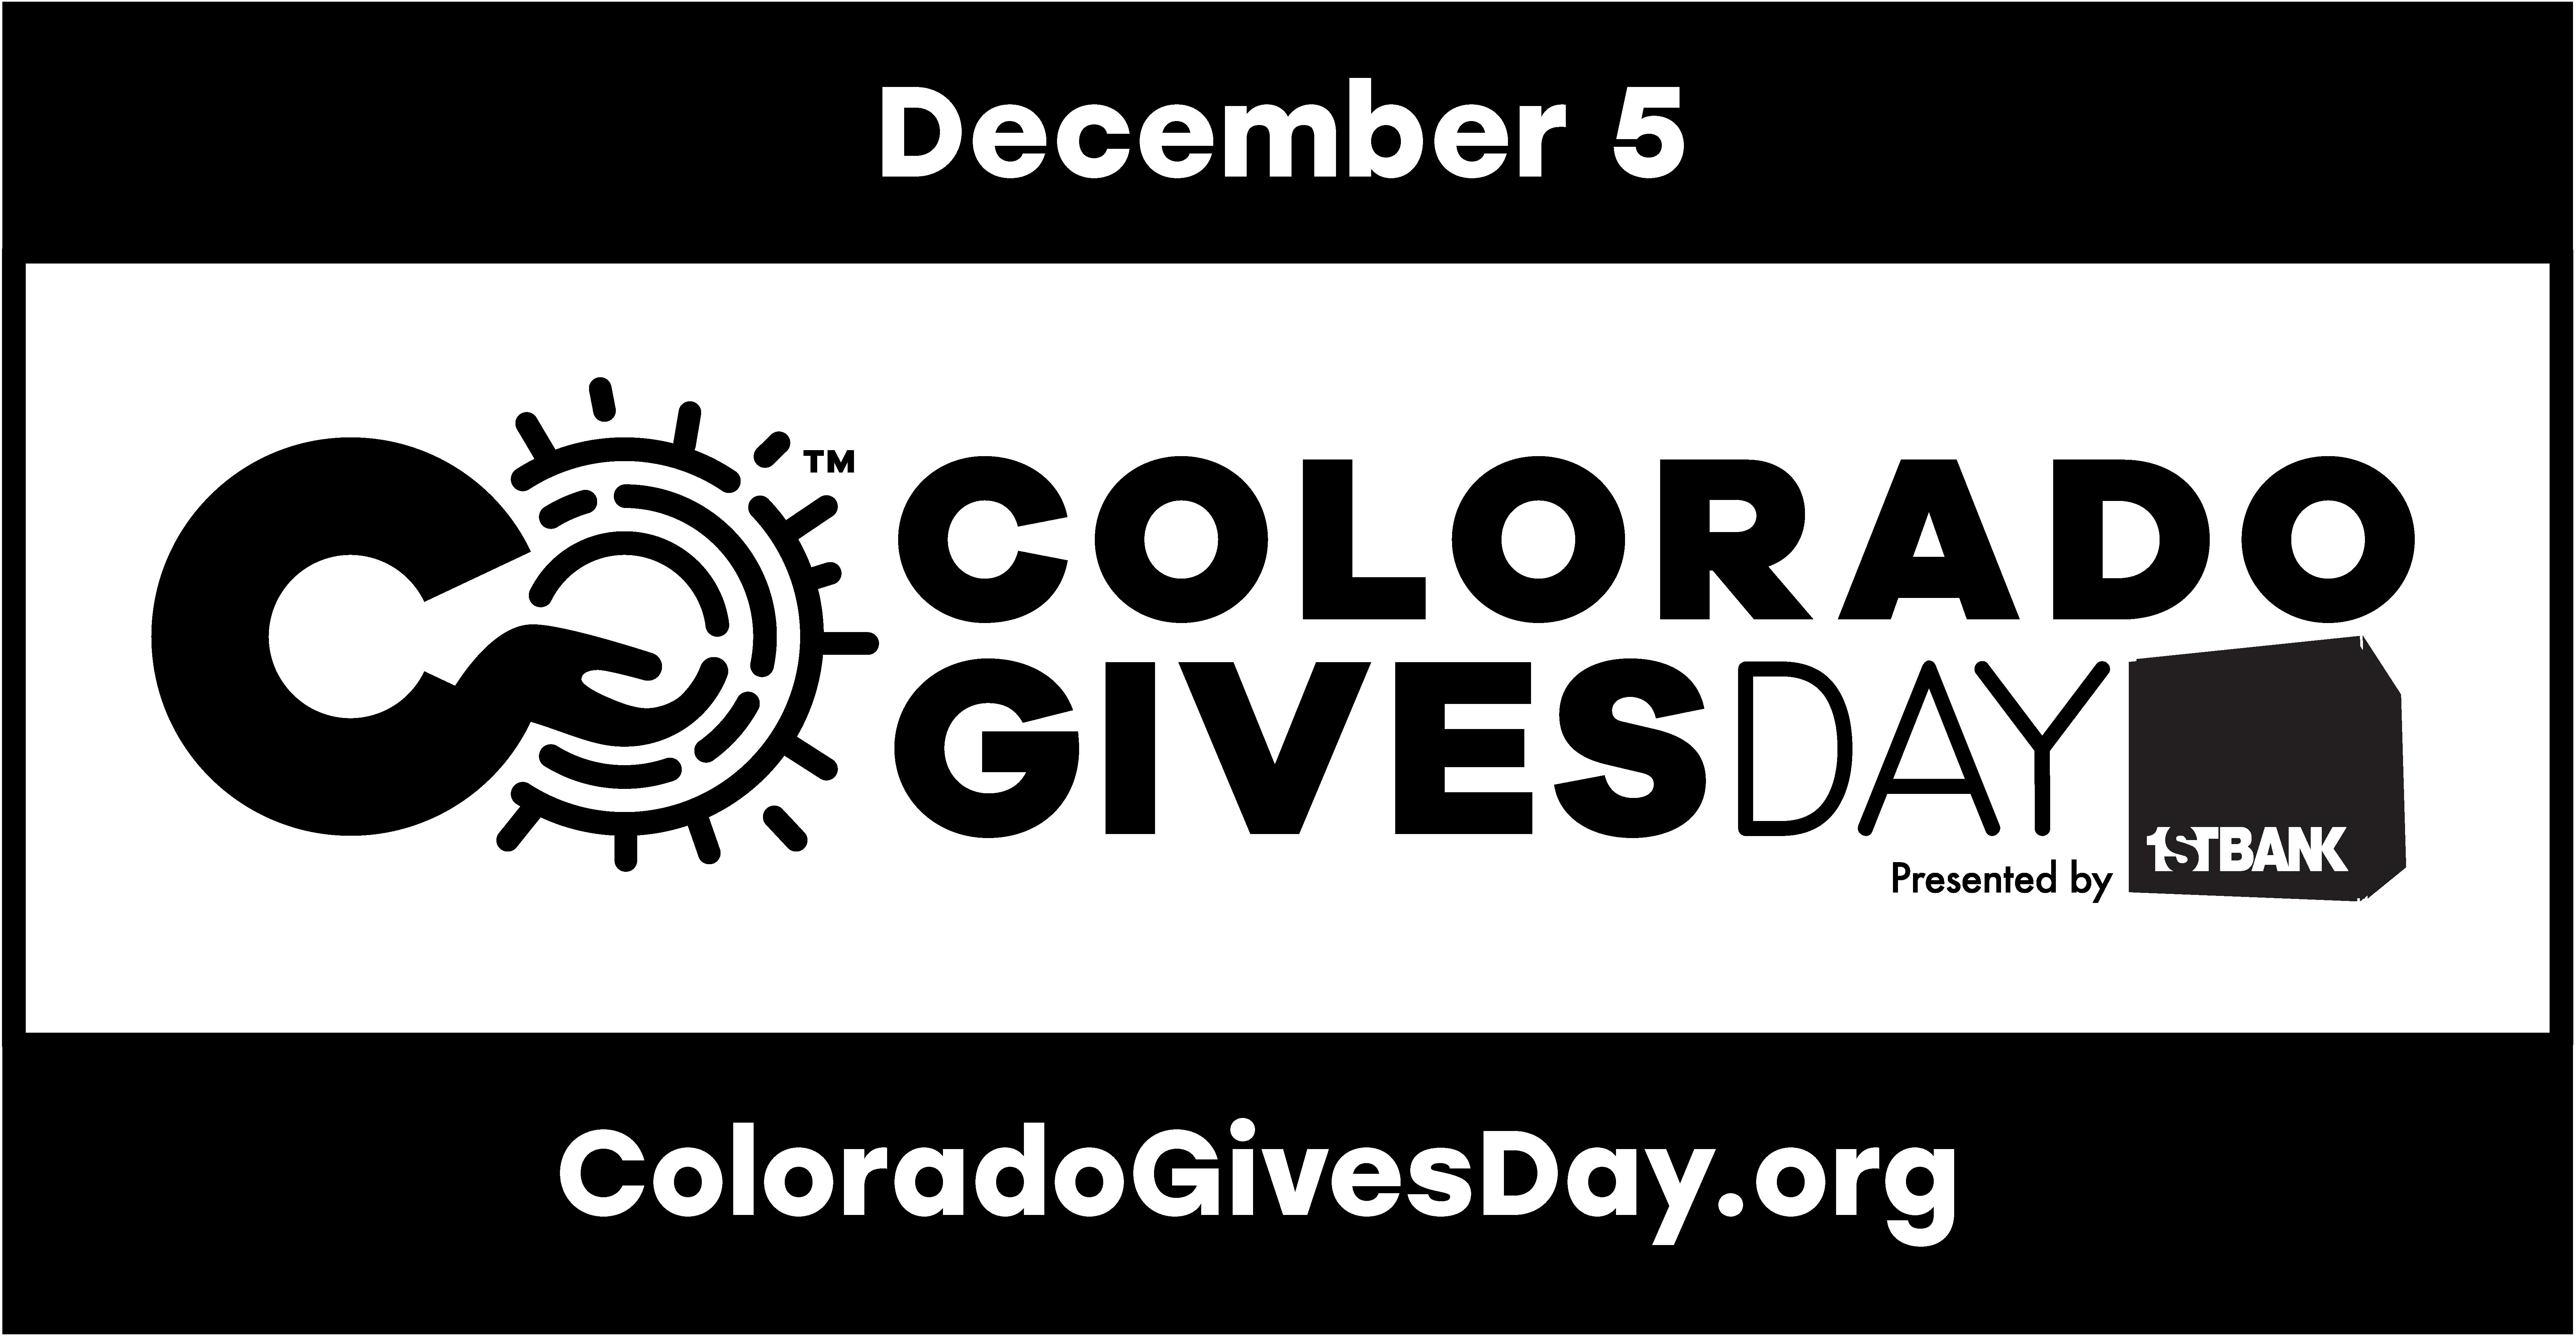 Horizontal black and white Colorado Gives Day 2023 logo with date and URL